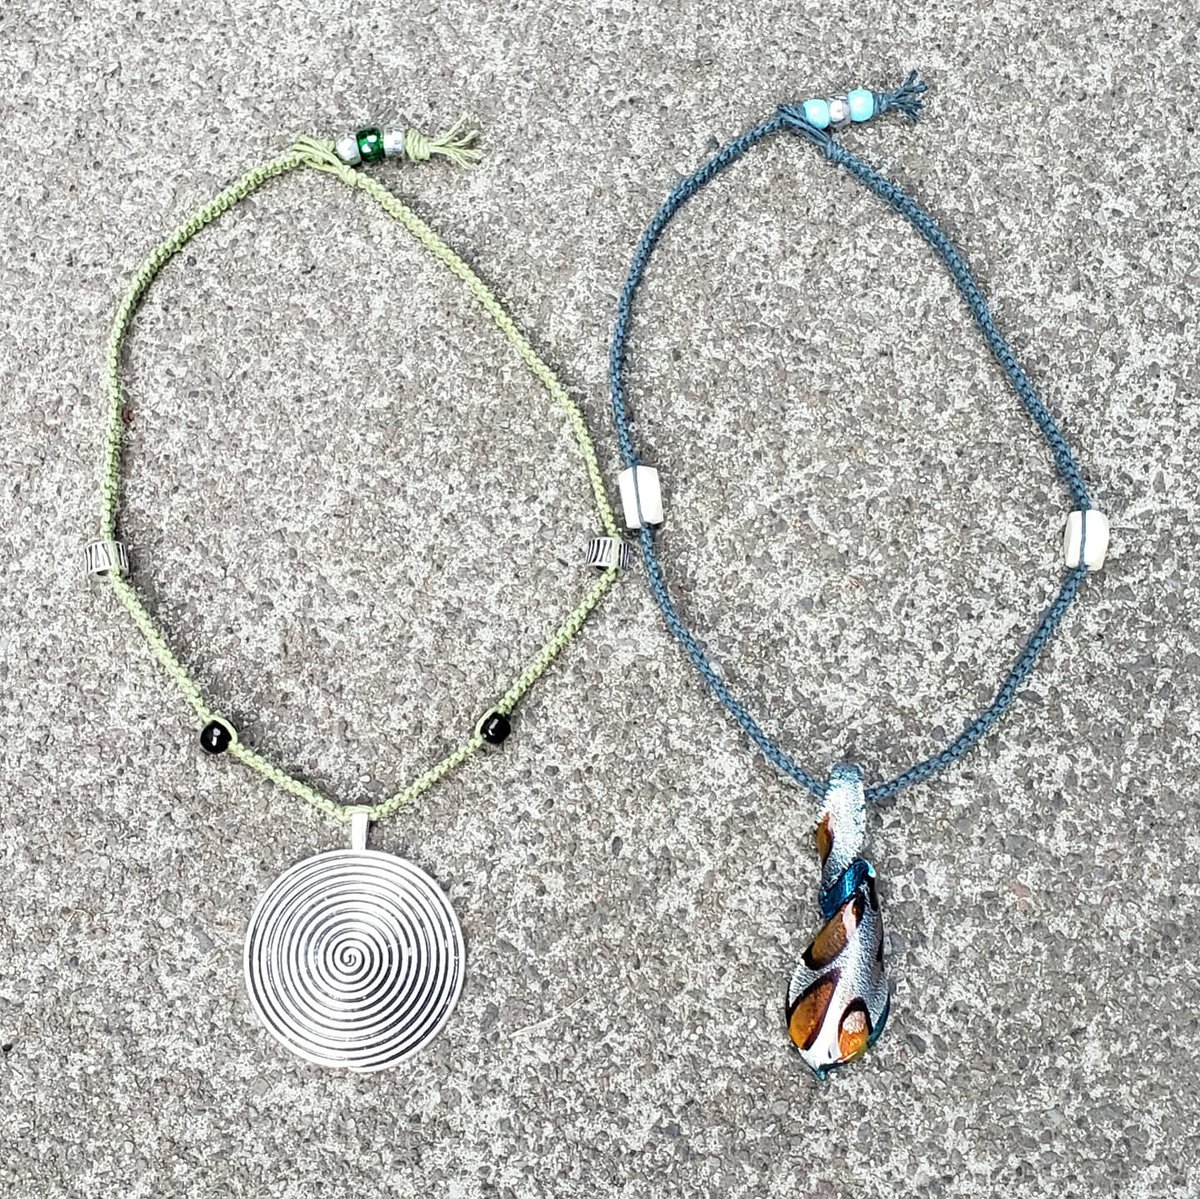 Two freshly knotted chokers available 💙 Check out parts 2 & 3 of this thread to see each necklace individually (1/3) #handmade #macramechokers #hempjewelry #glassbeads #bonebeads #glasspendant #metallicpendant #knotty_introvert_creations